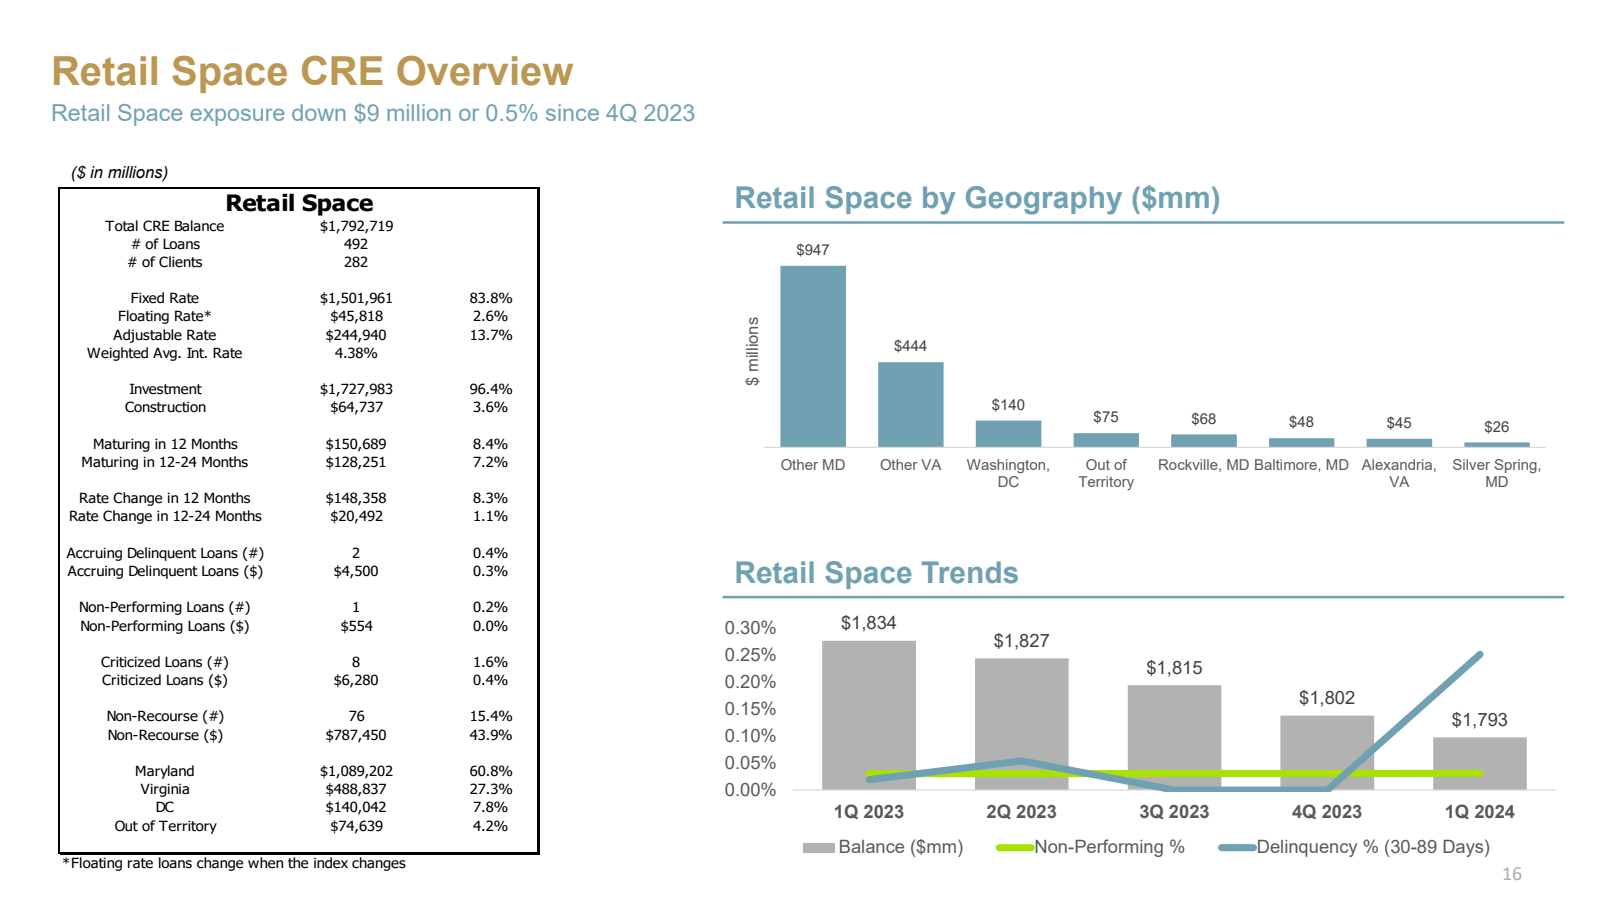 Retail Space CRE Ove